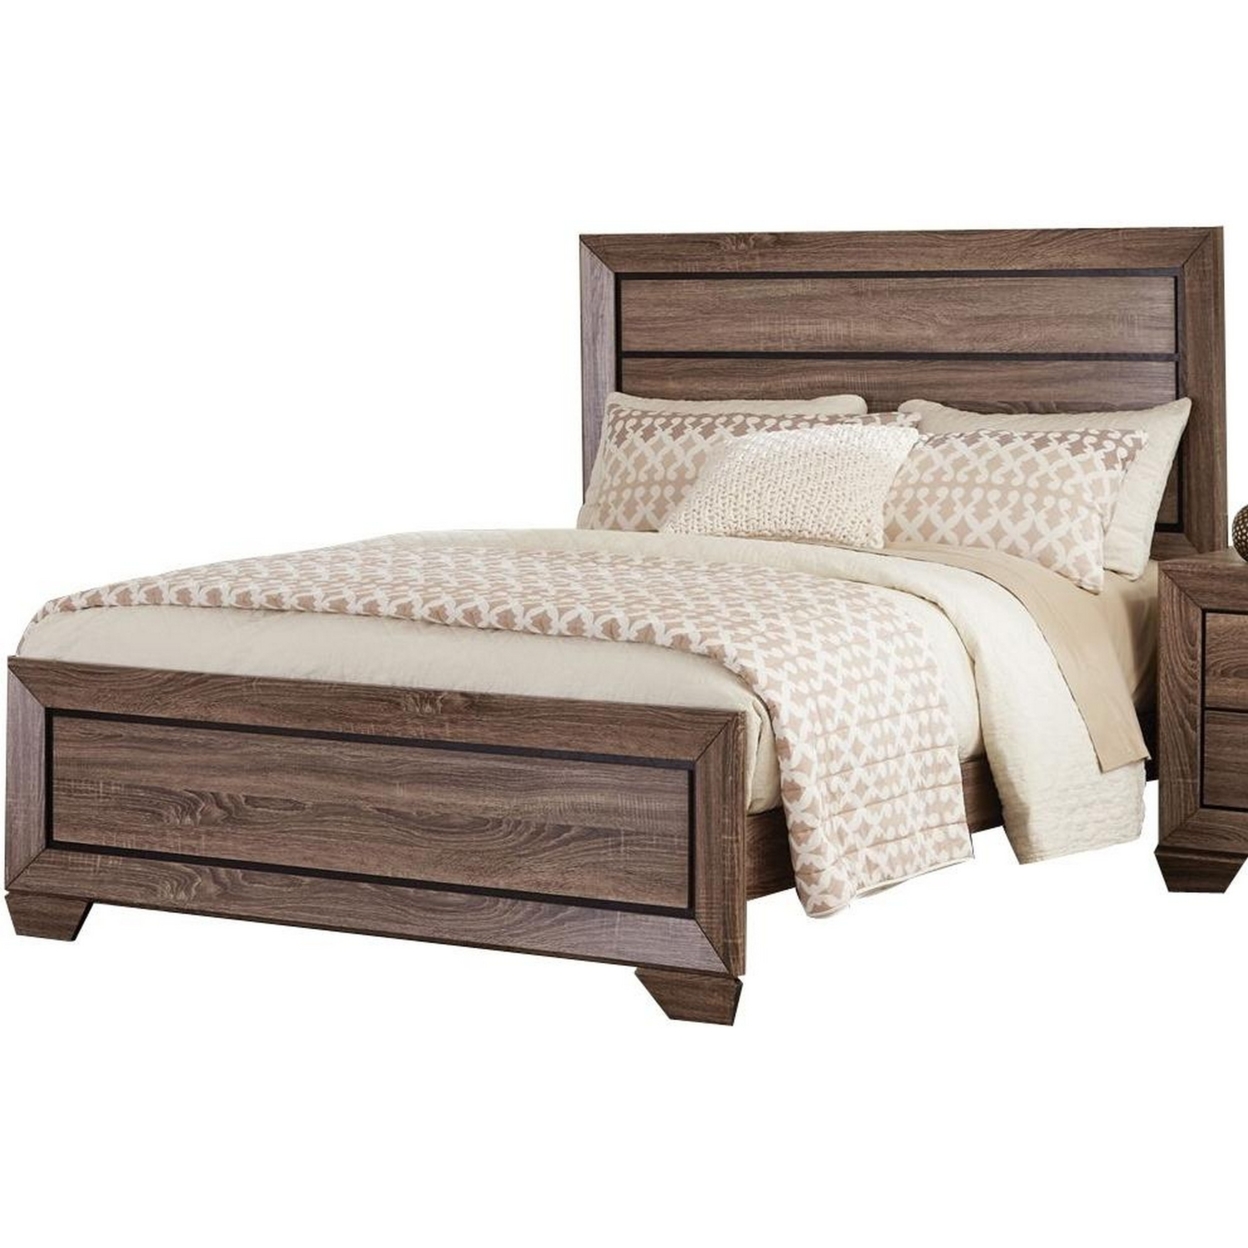 Transitional Style Queen Size Bed With Natural Grain Details, Brown- Saltoro Sherpi